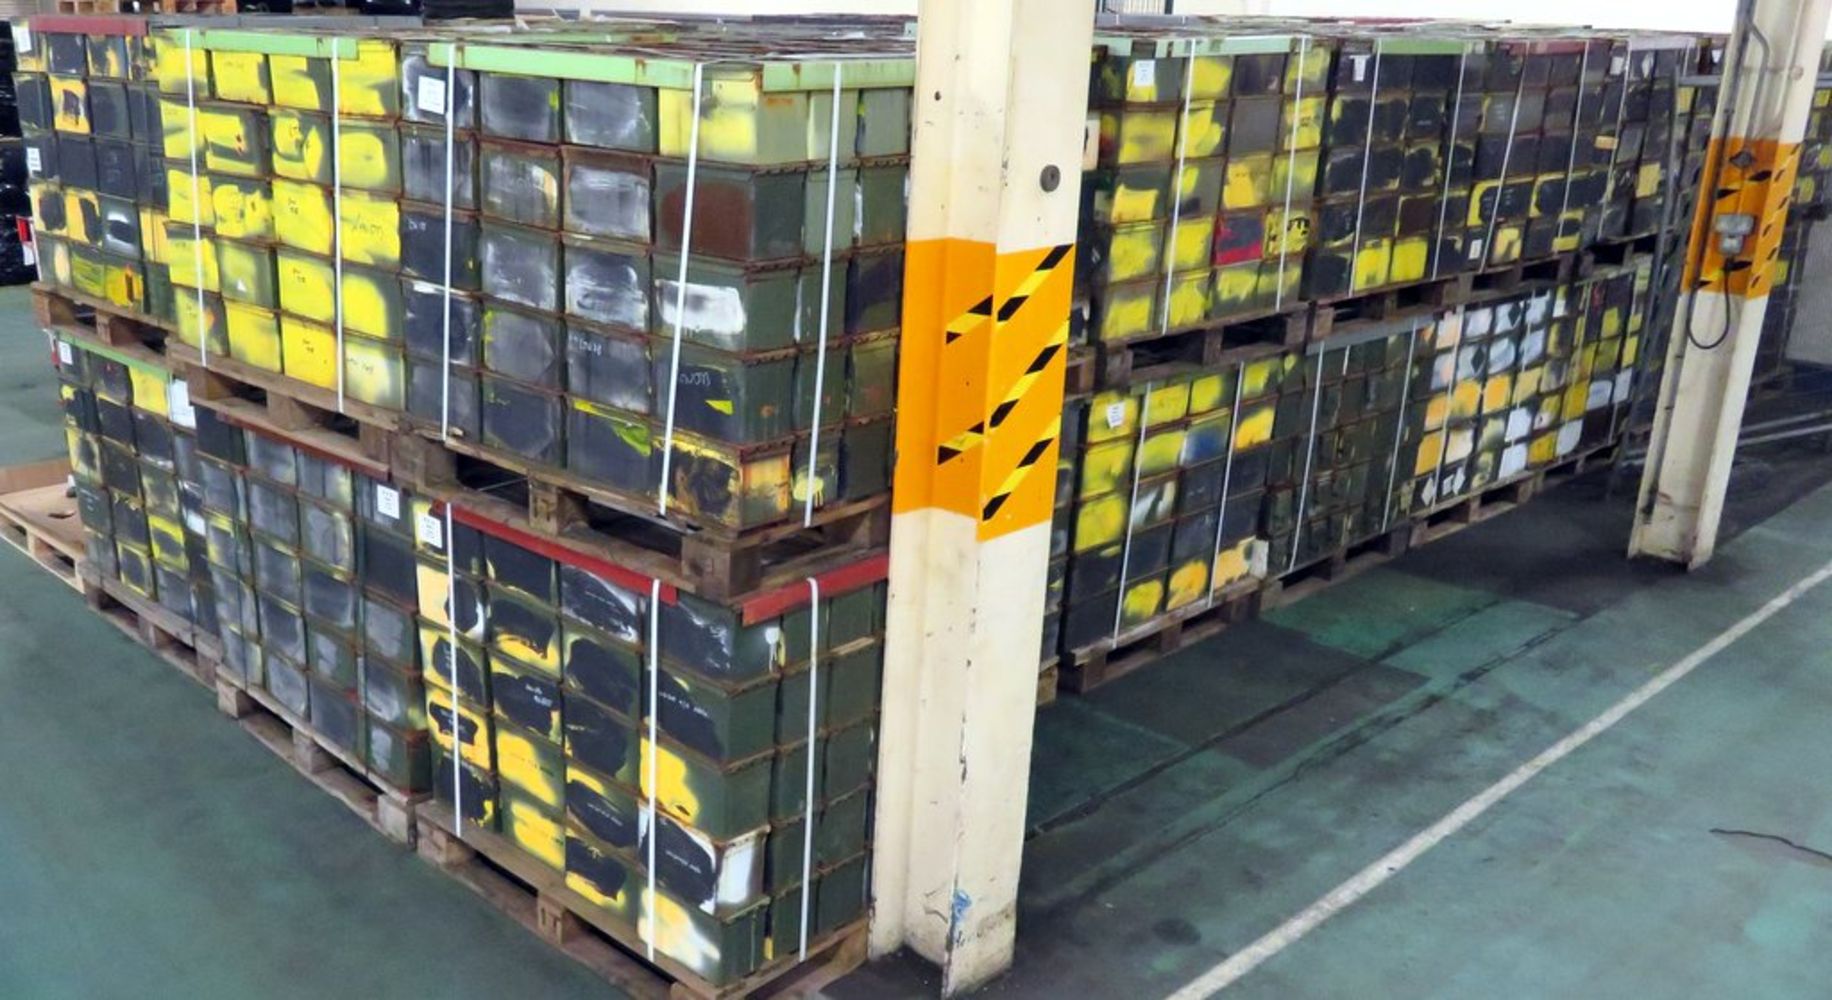 One Artic Lorry Load Of Ex MoD M2A1 Ammunition Containers - 48 Pallets - Quantity 5760 Boxes